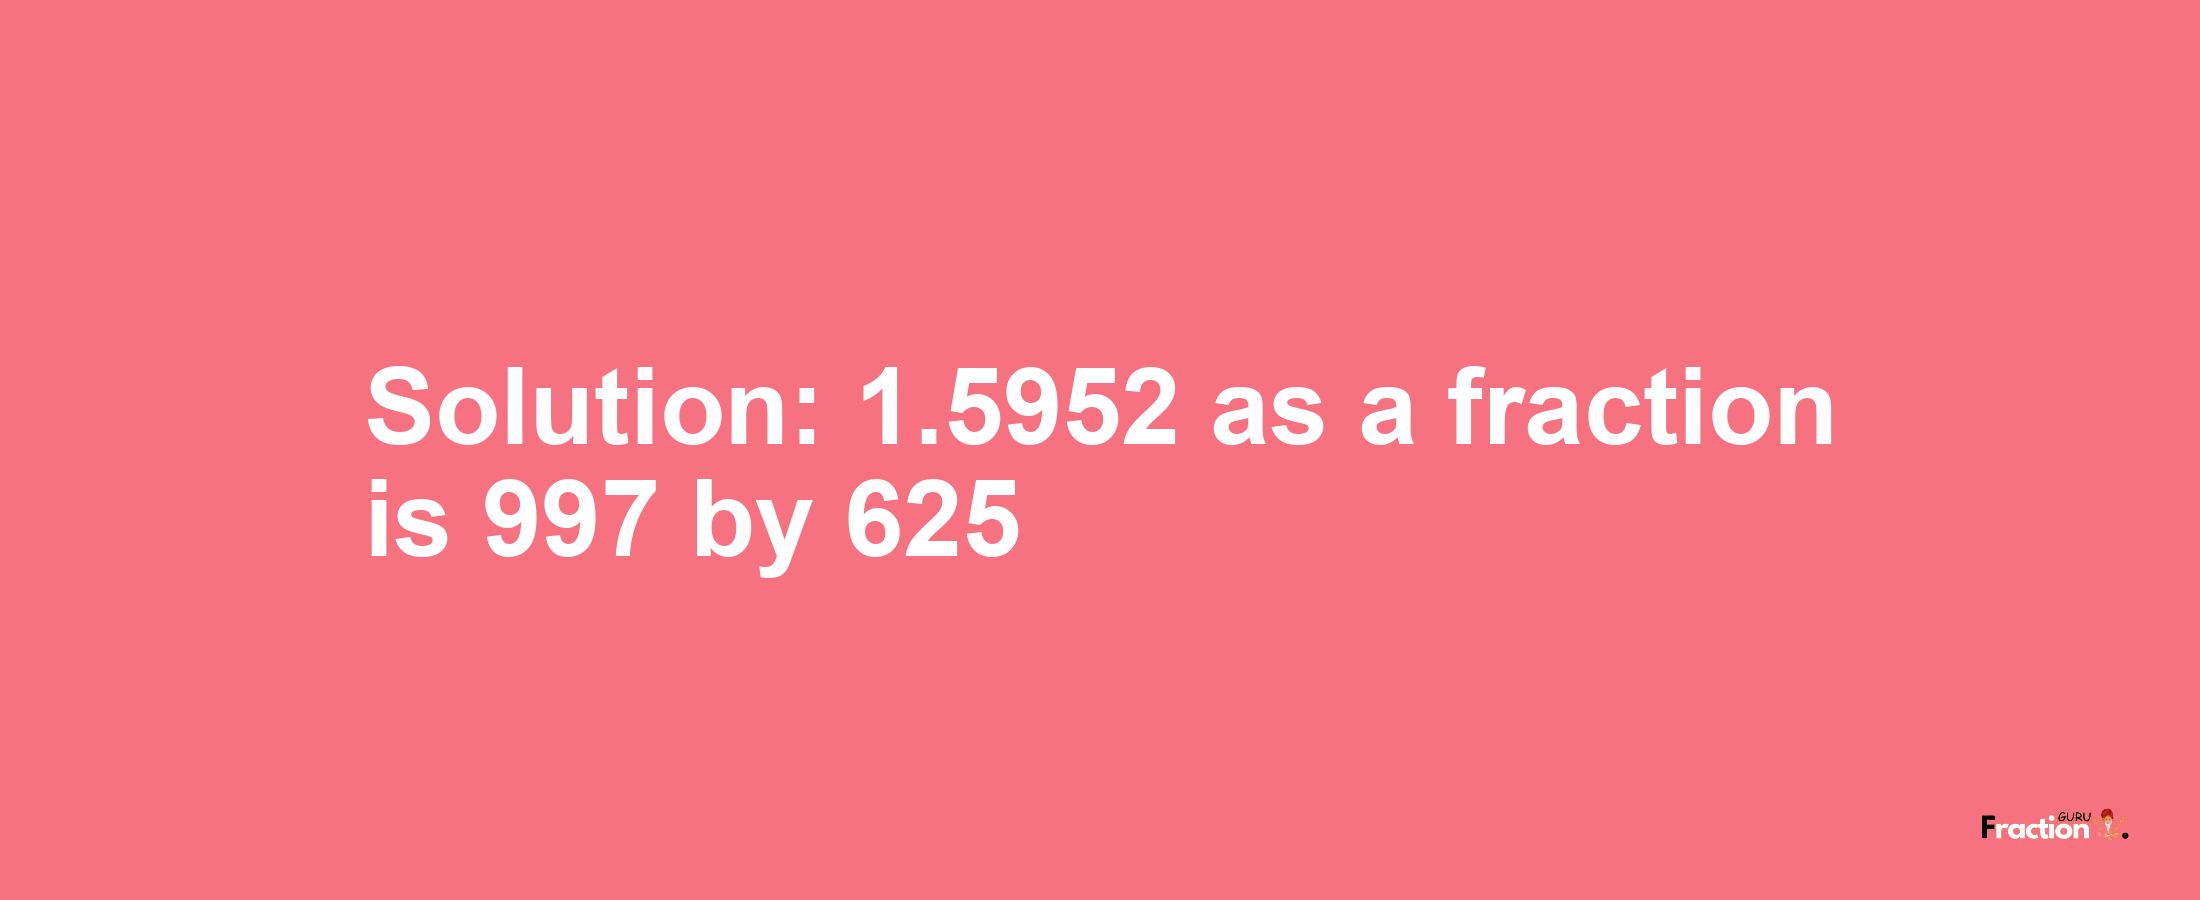 Solution:1.5952 as a fraction is 997/625